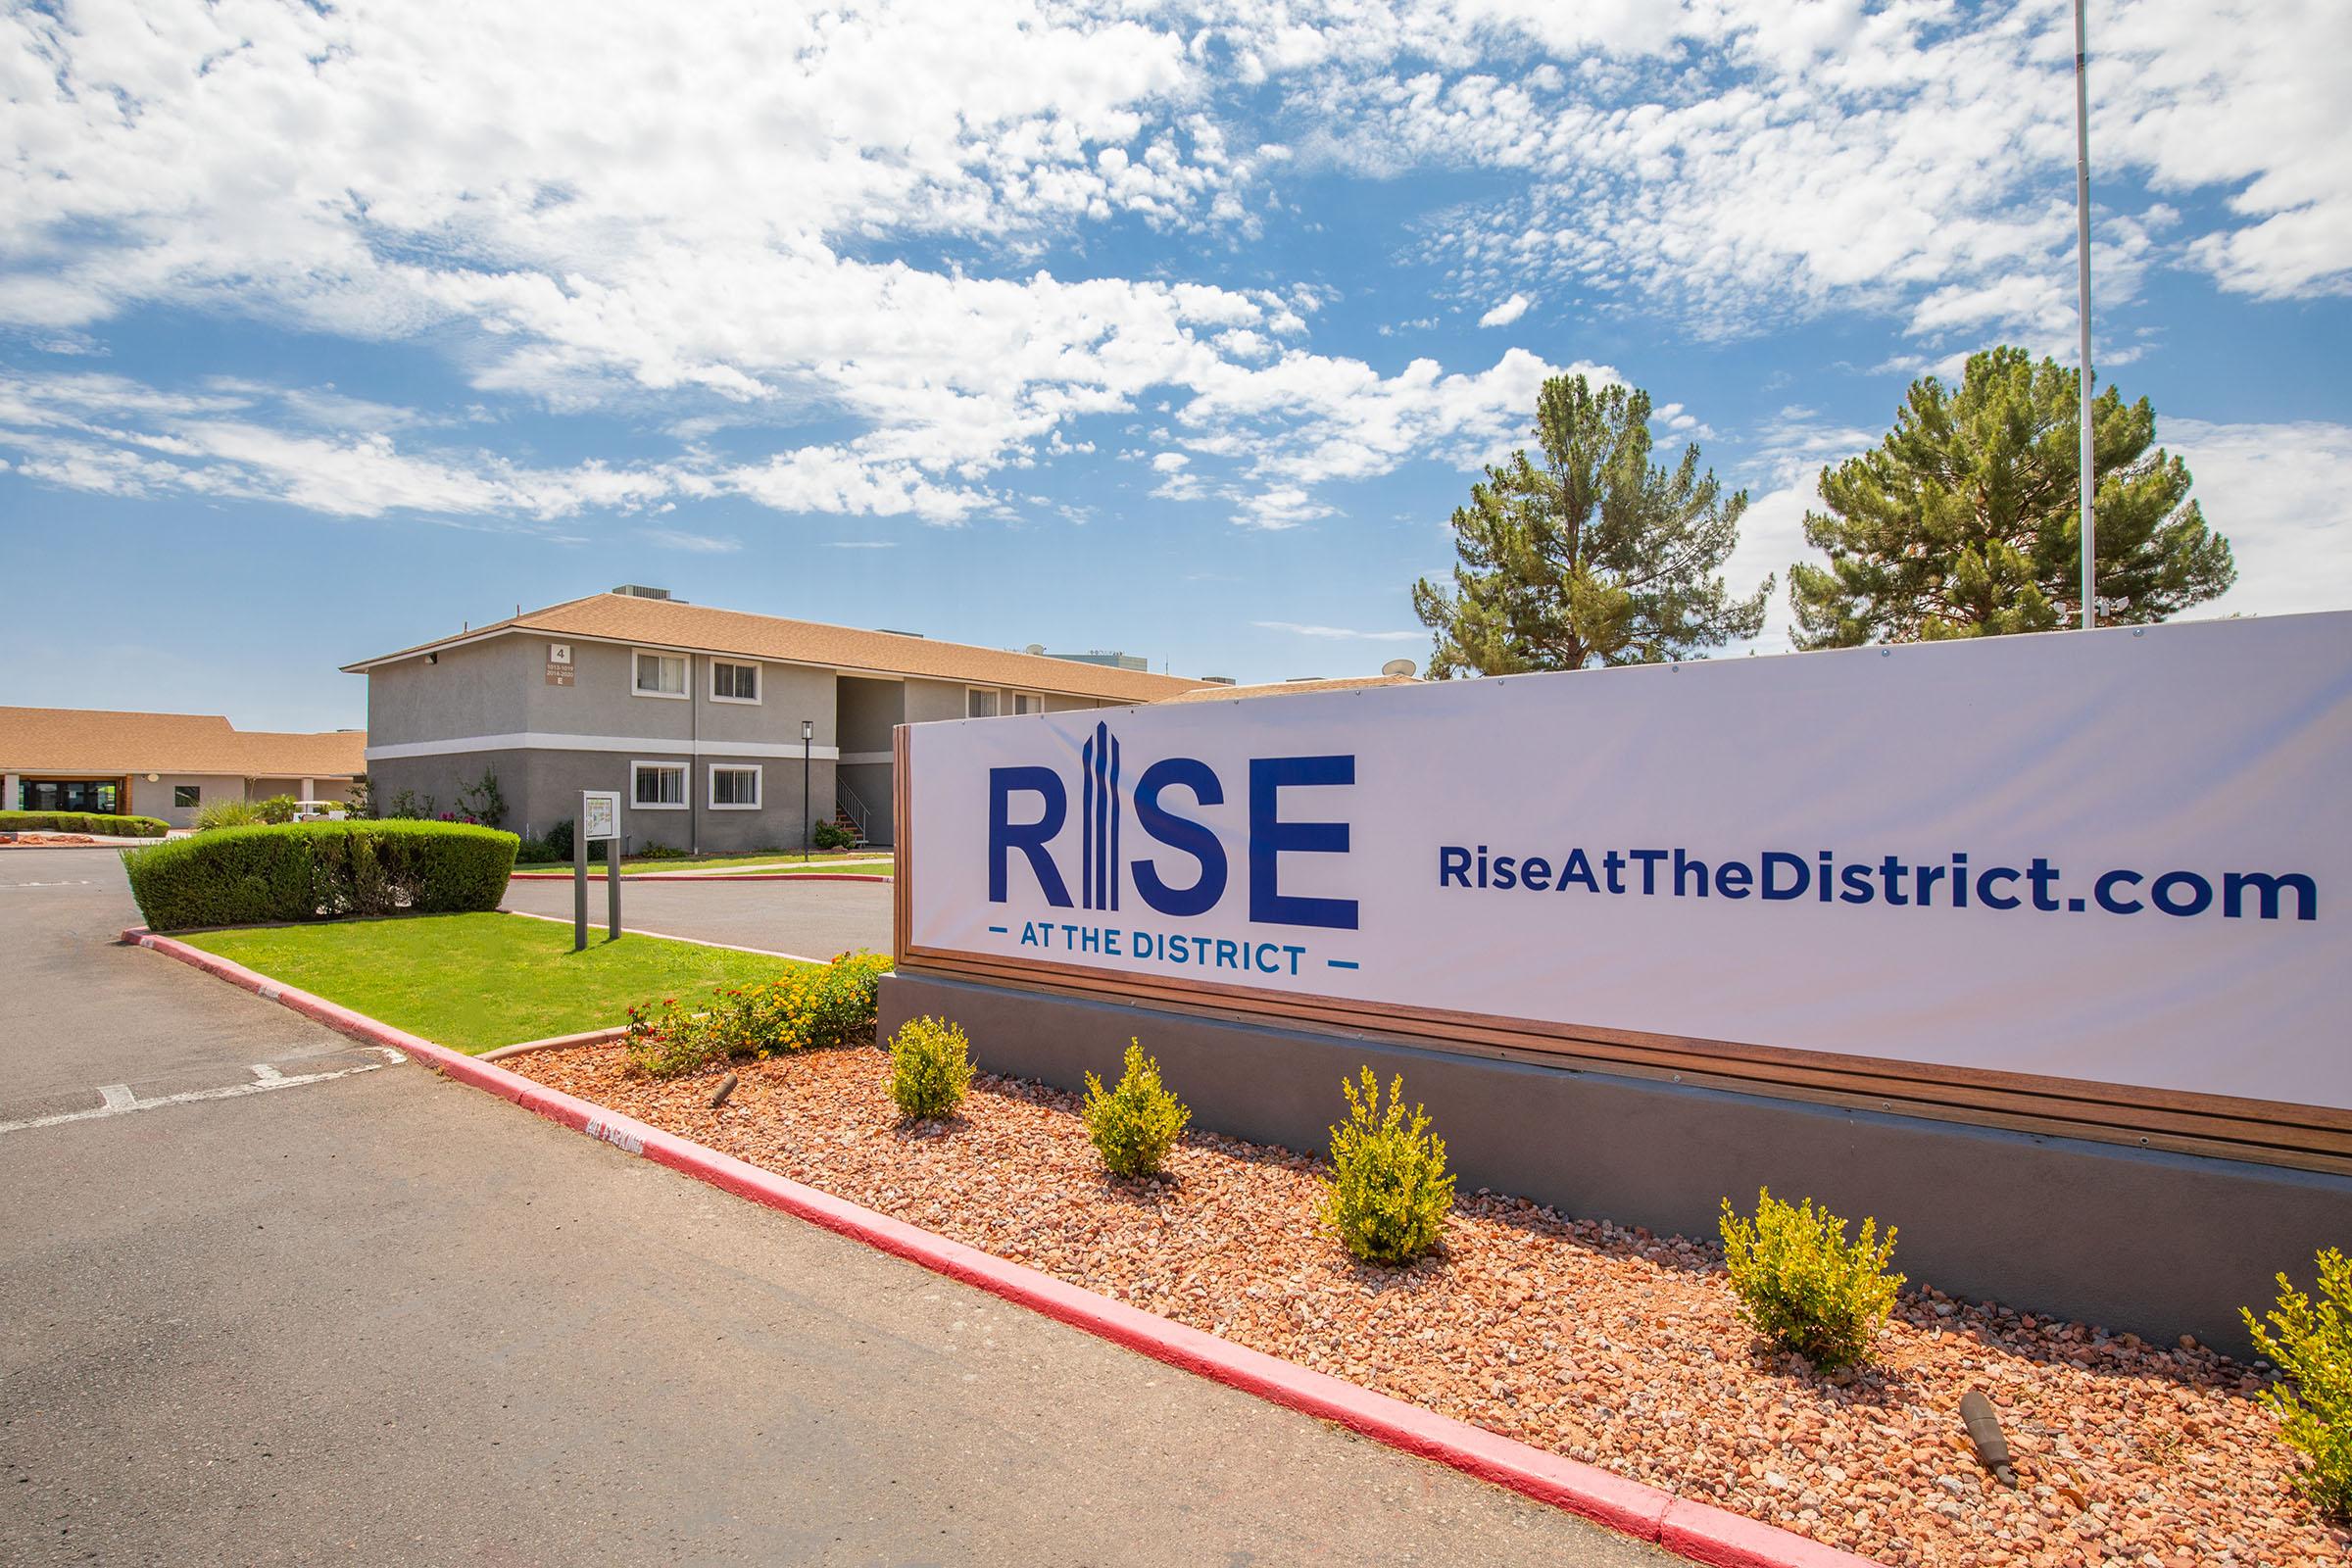 Rise at The District welcome sign in front of apartment buildings